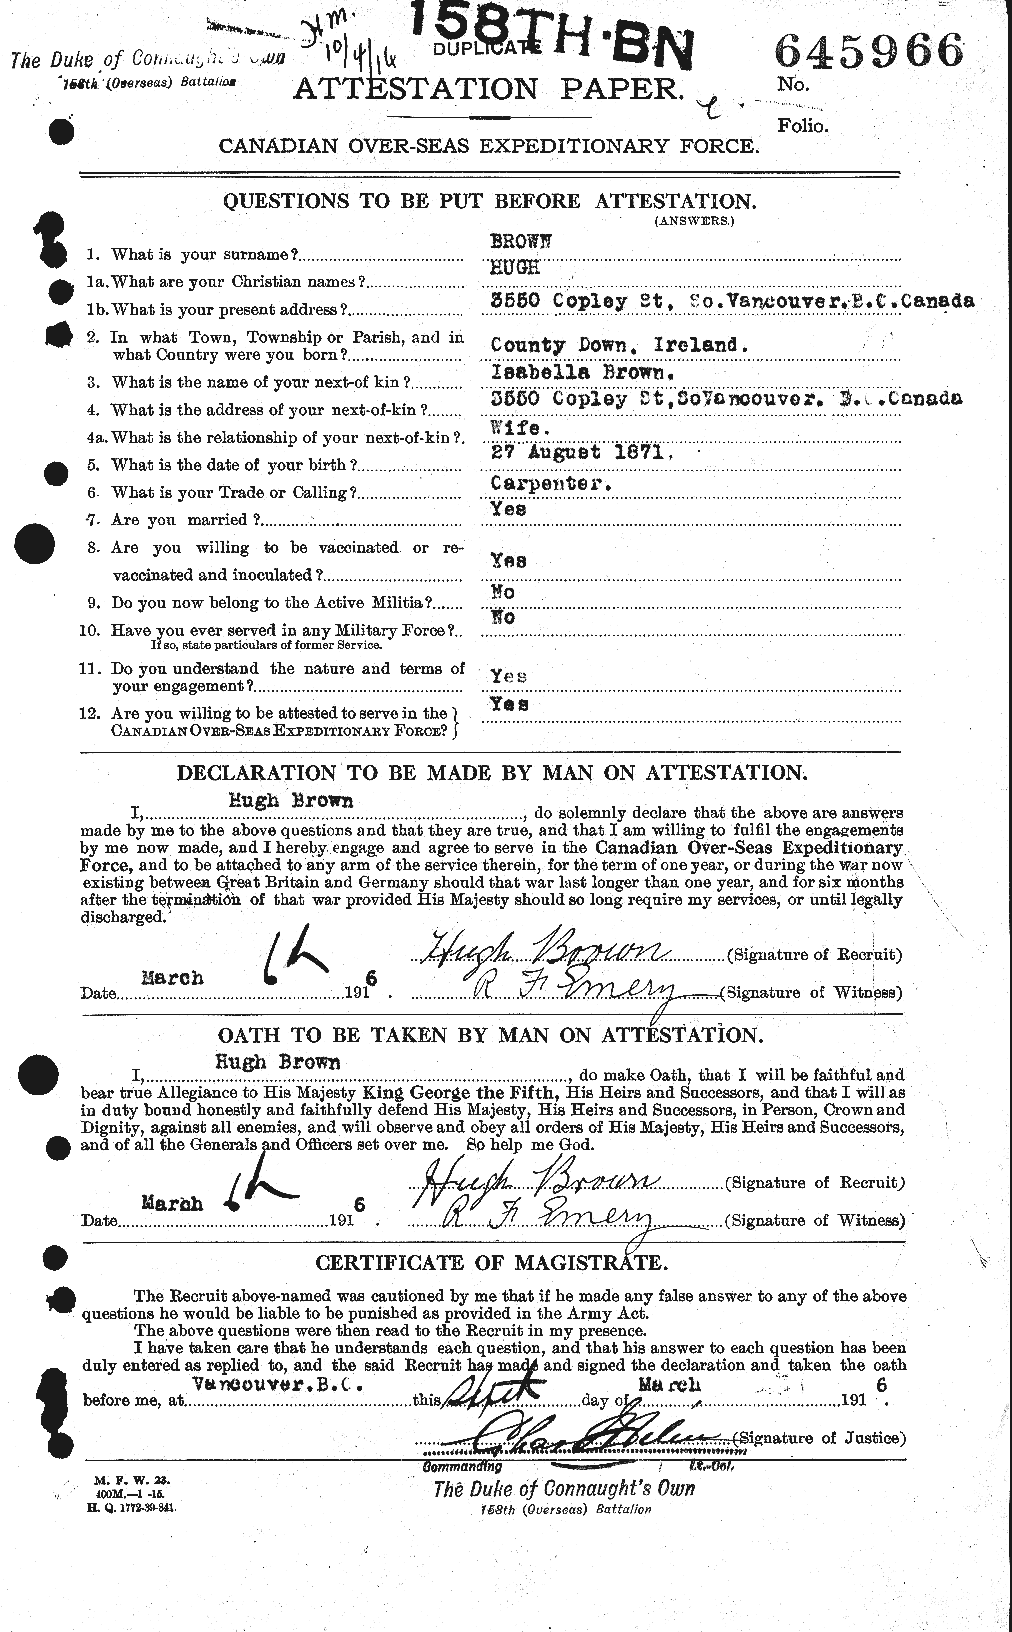 Personnel Records of the First World War - CEF 265640a